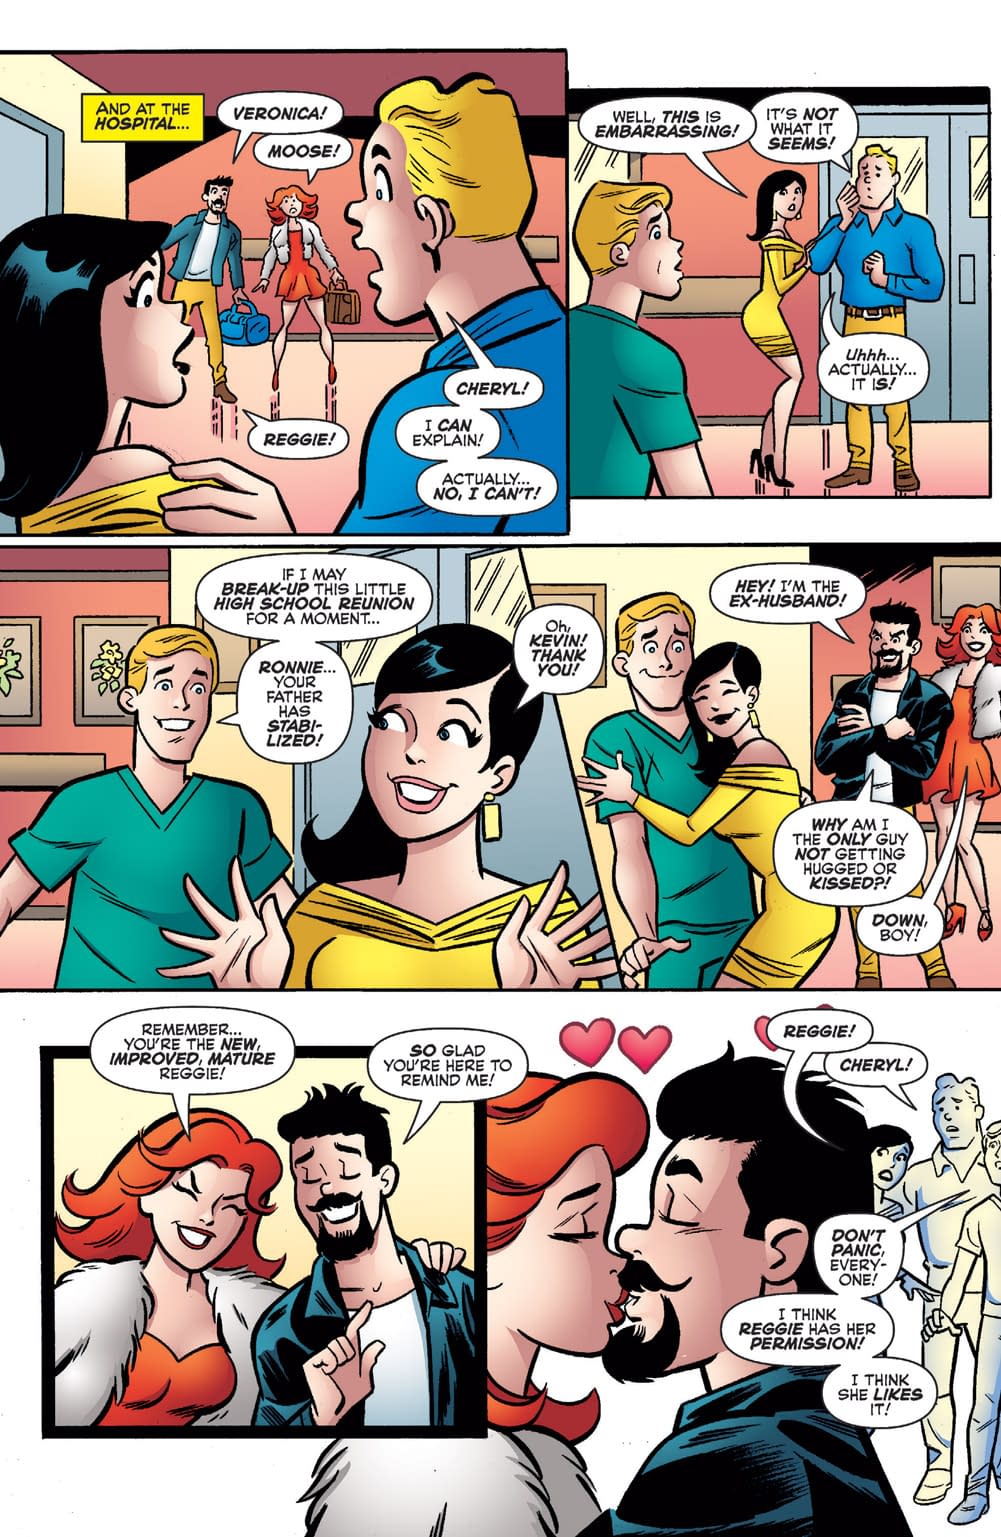 Shocking Election Results in this Preview of Archie: The Married Life: 10th Anniversary #6